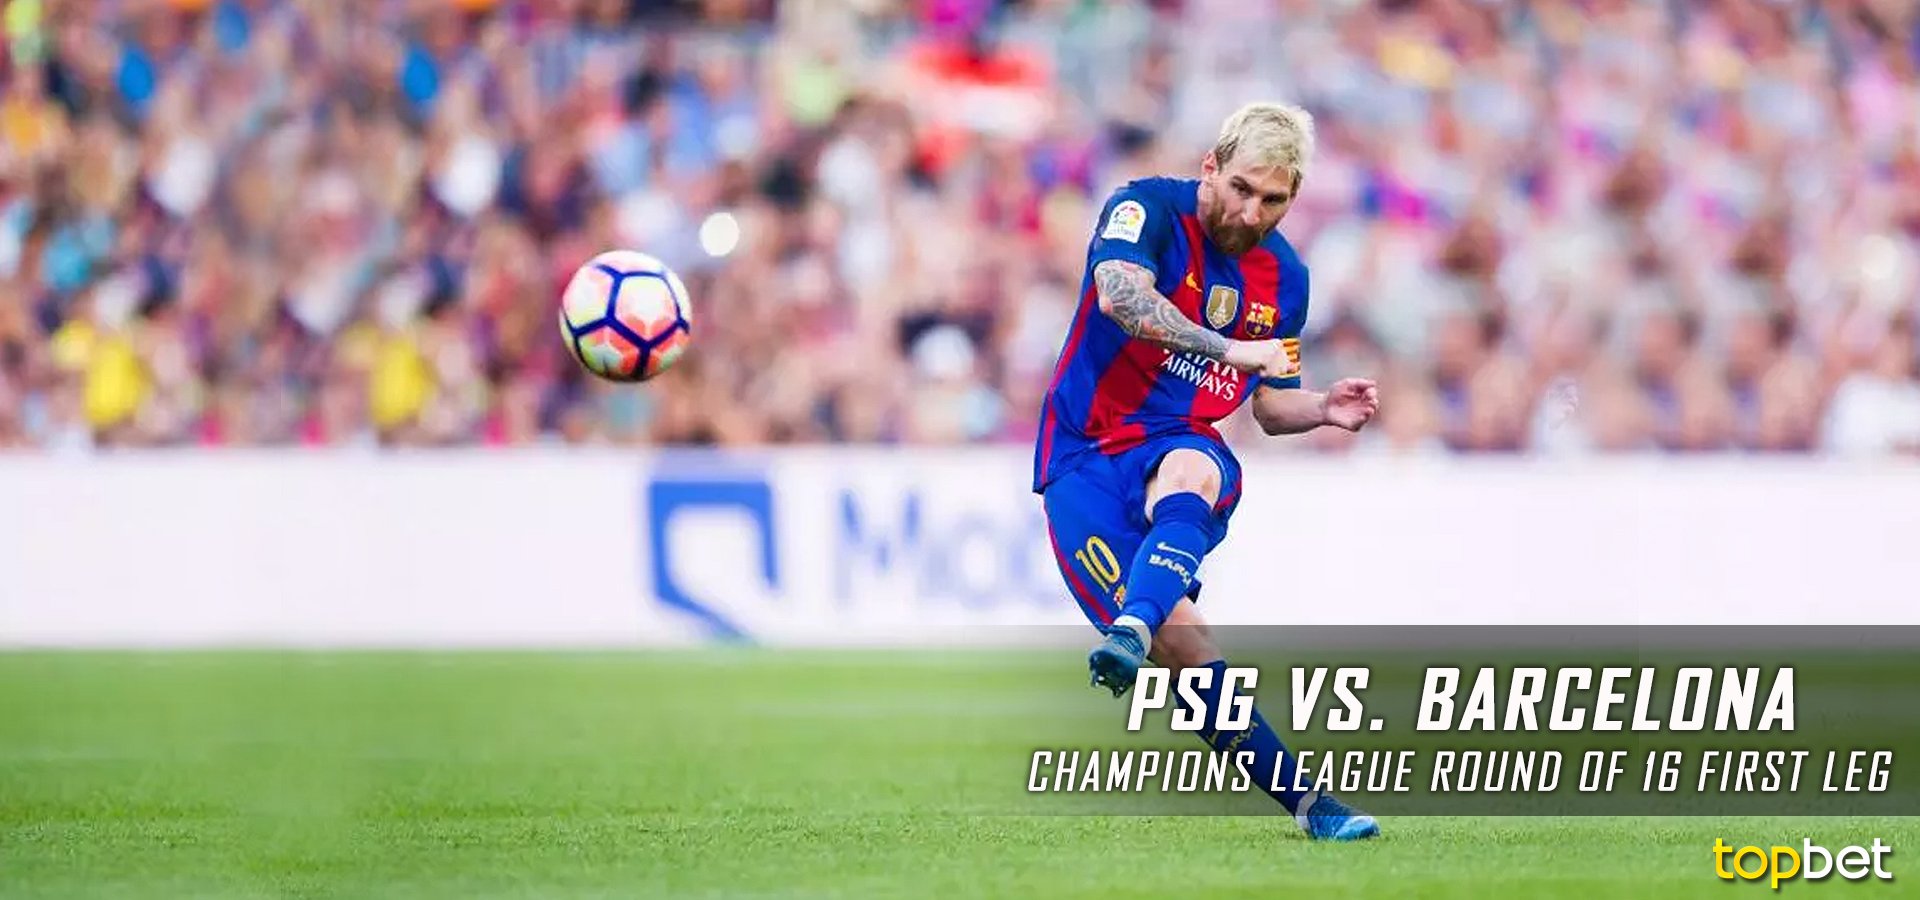 PSG vs Barcelona Champions League Predictions and Preview1920 x 900